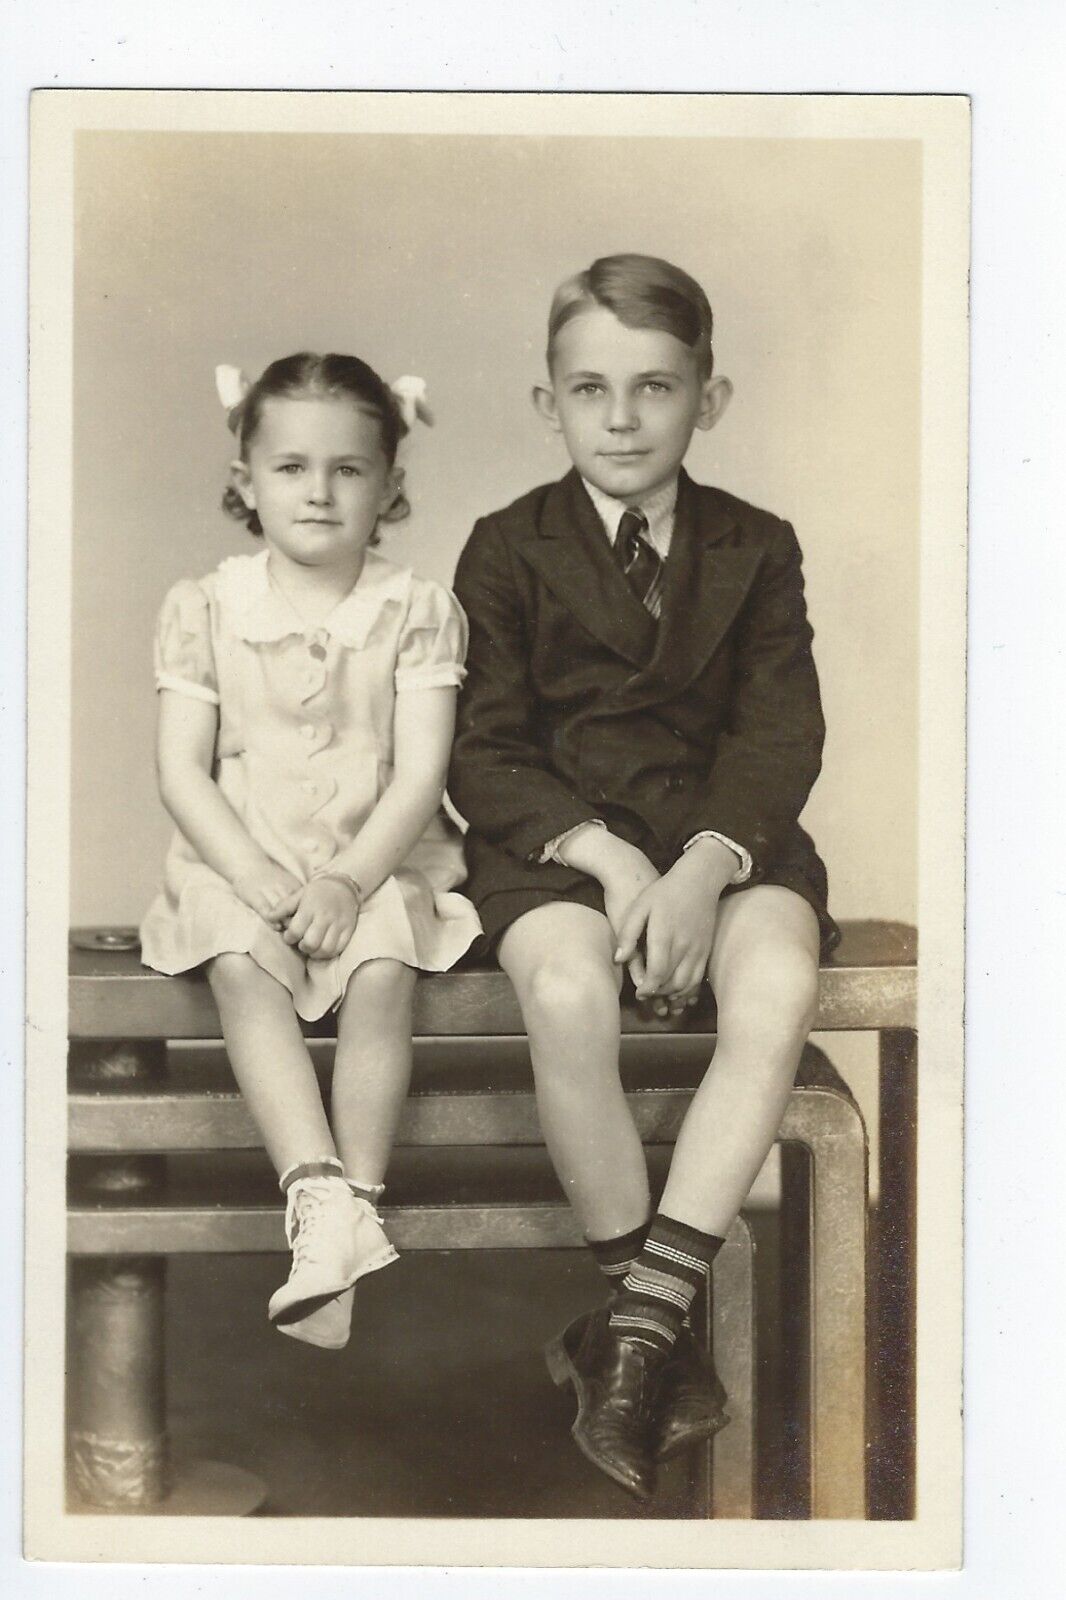 Brother & Sister Formal Portrait Real Photo Postcard RPPC Posing c1935